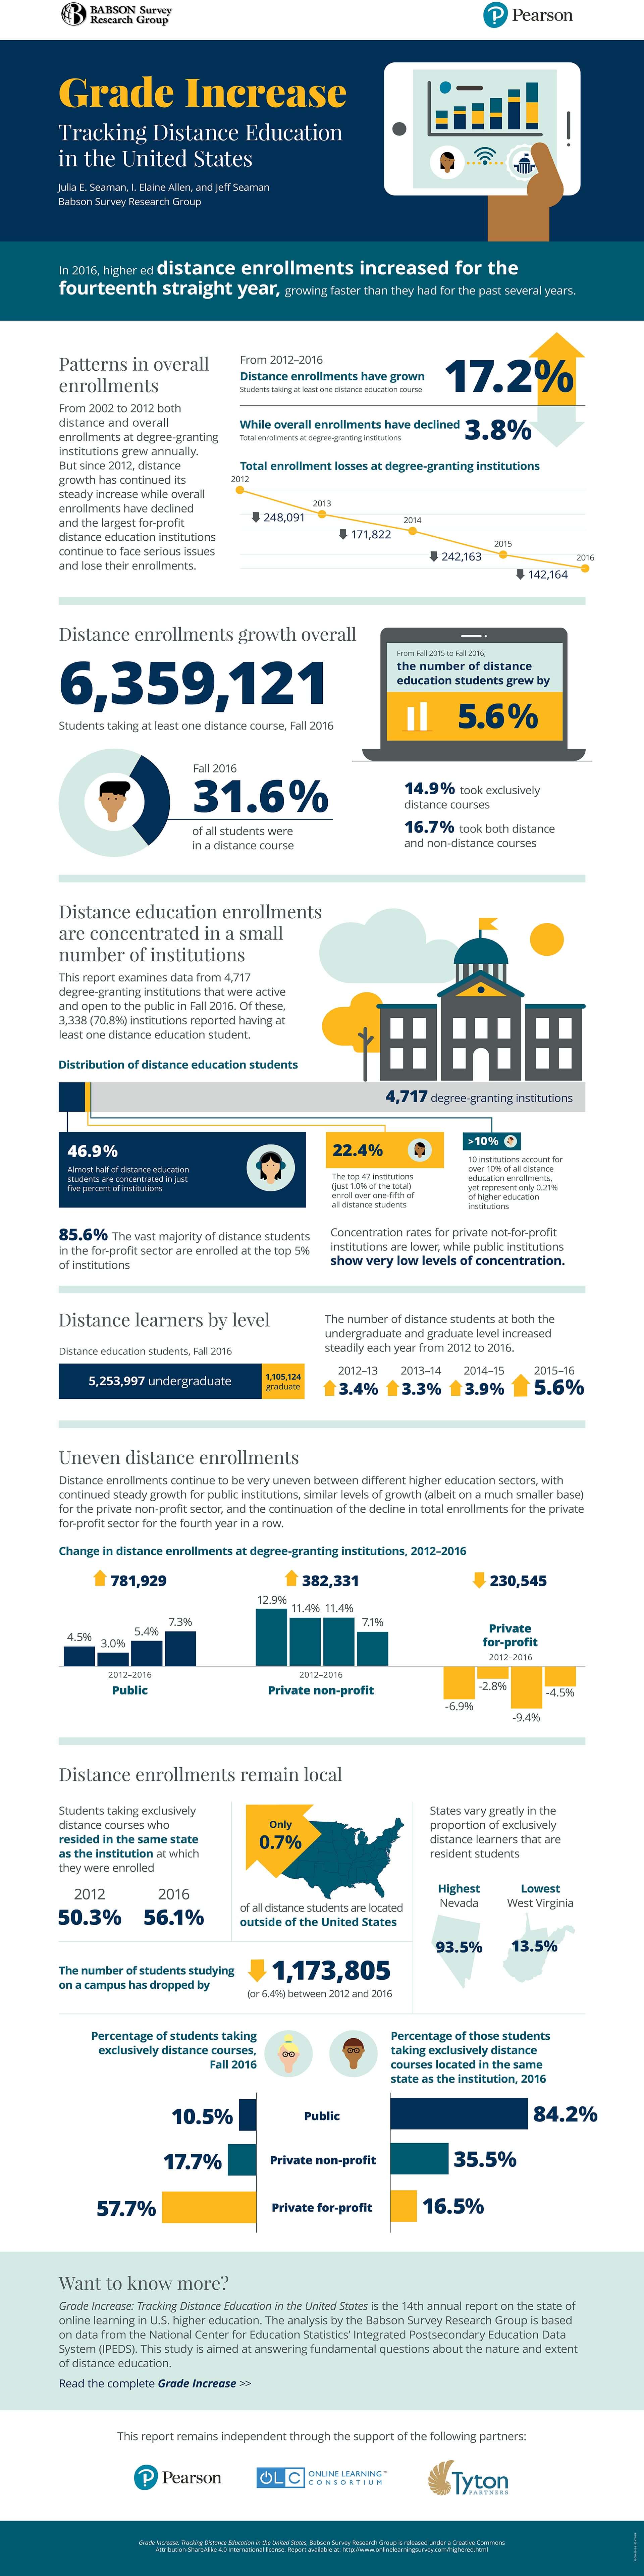 Grade Increase: Tracking Distance Education in the U.S. [Infographic]